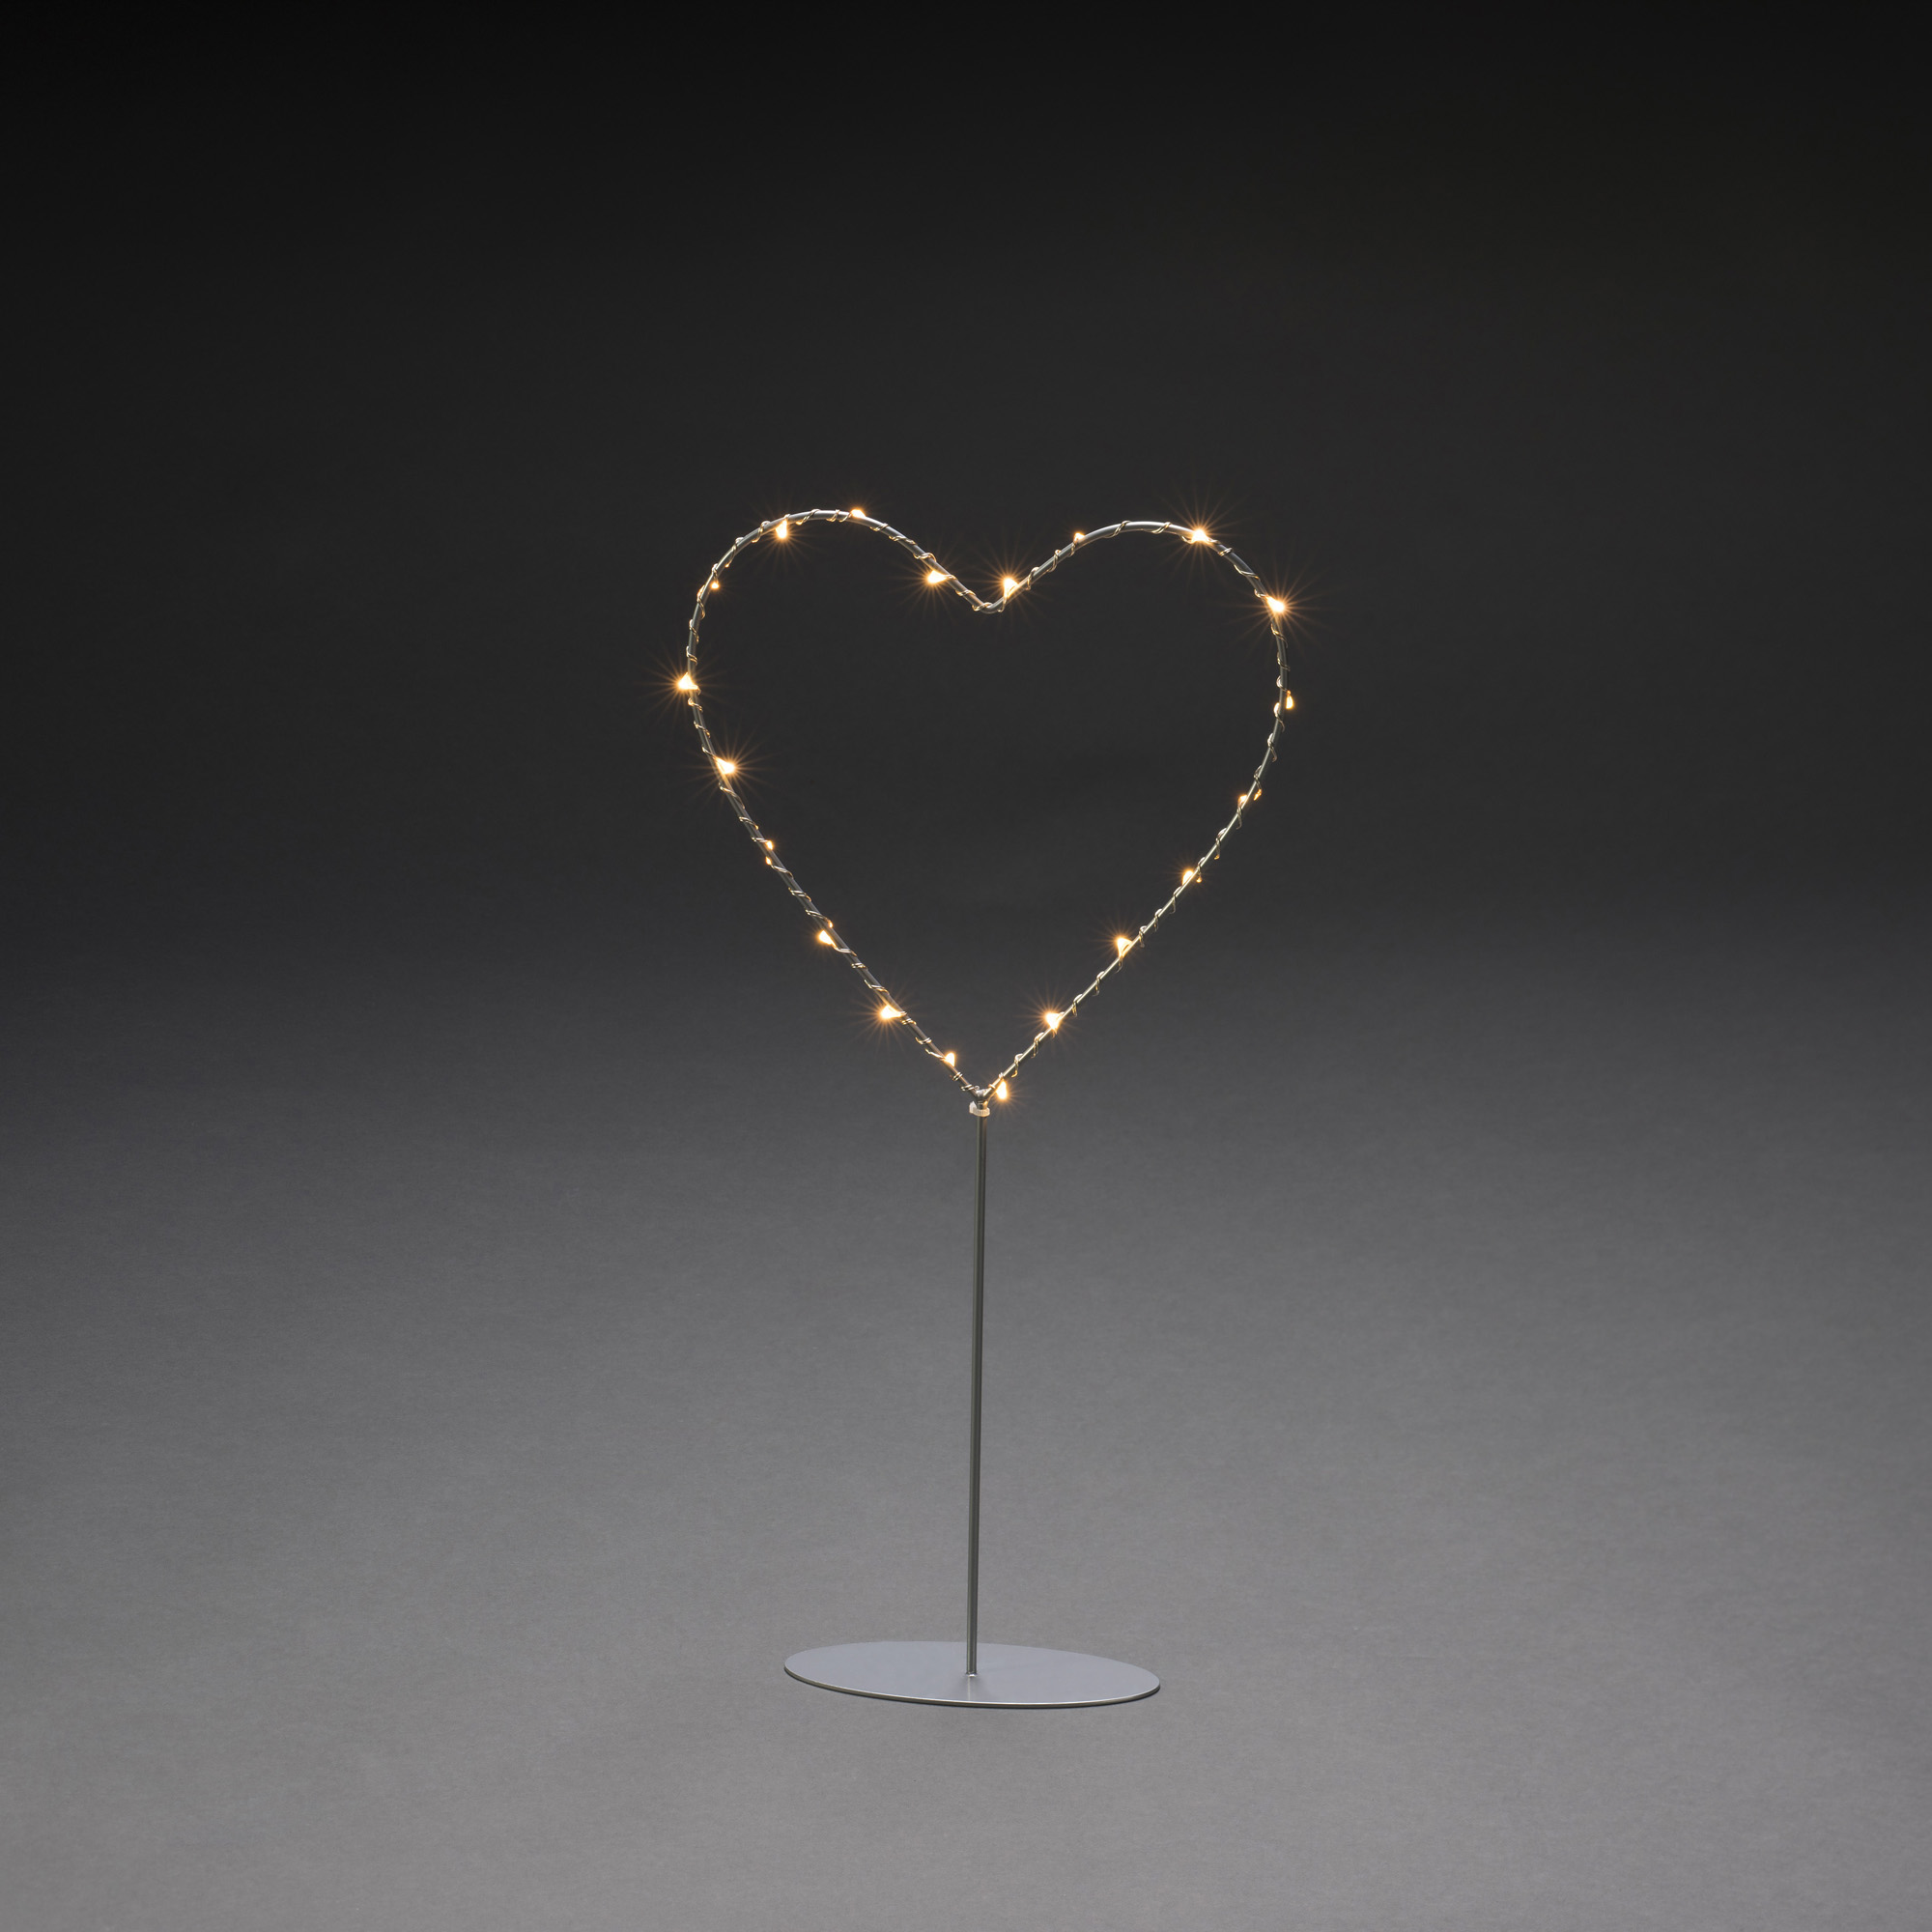 LED Metal Heart with Metal Base, amber, 20 LEDs, 6h Timer, Battery Operated